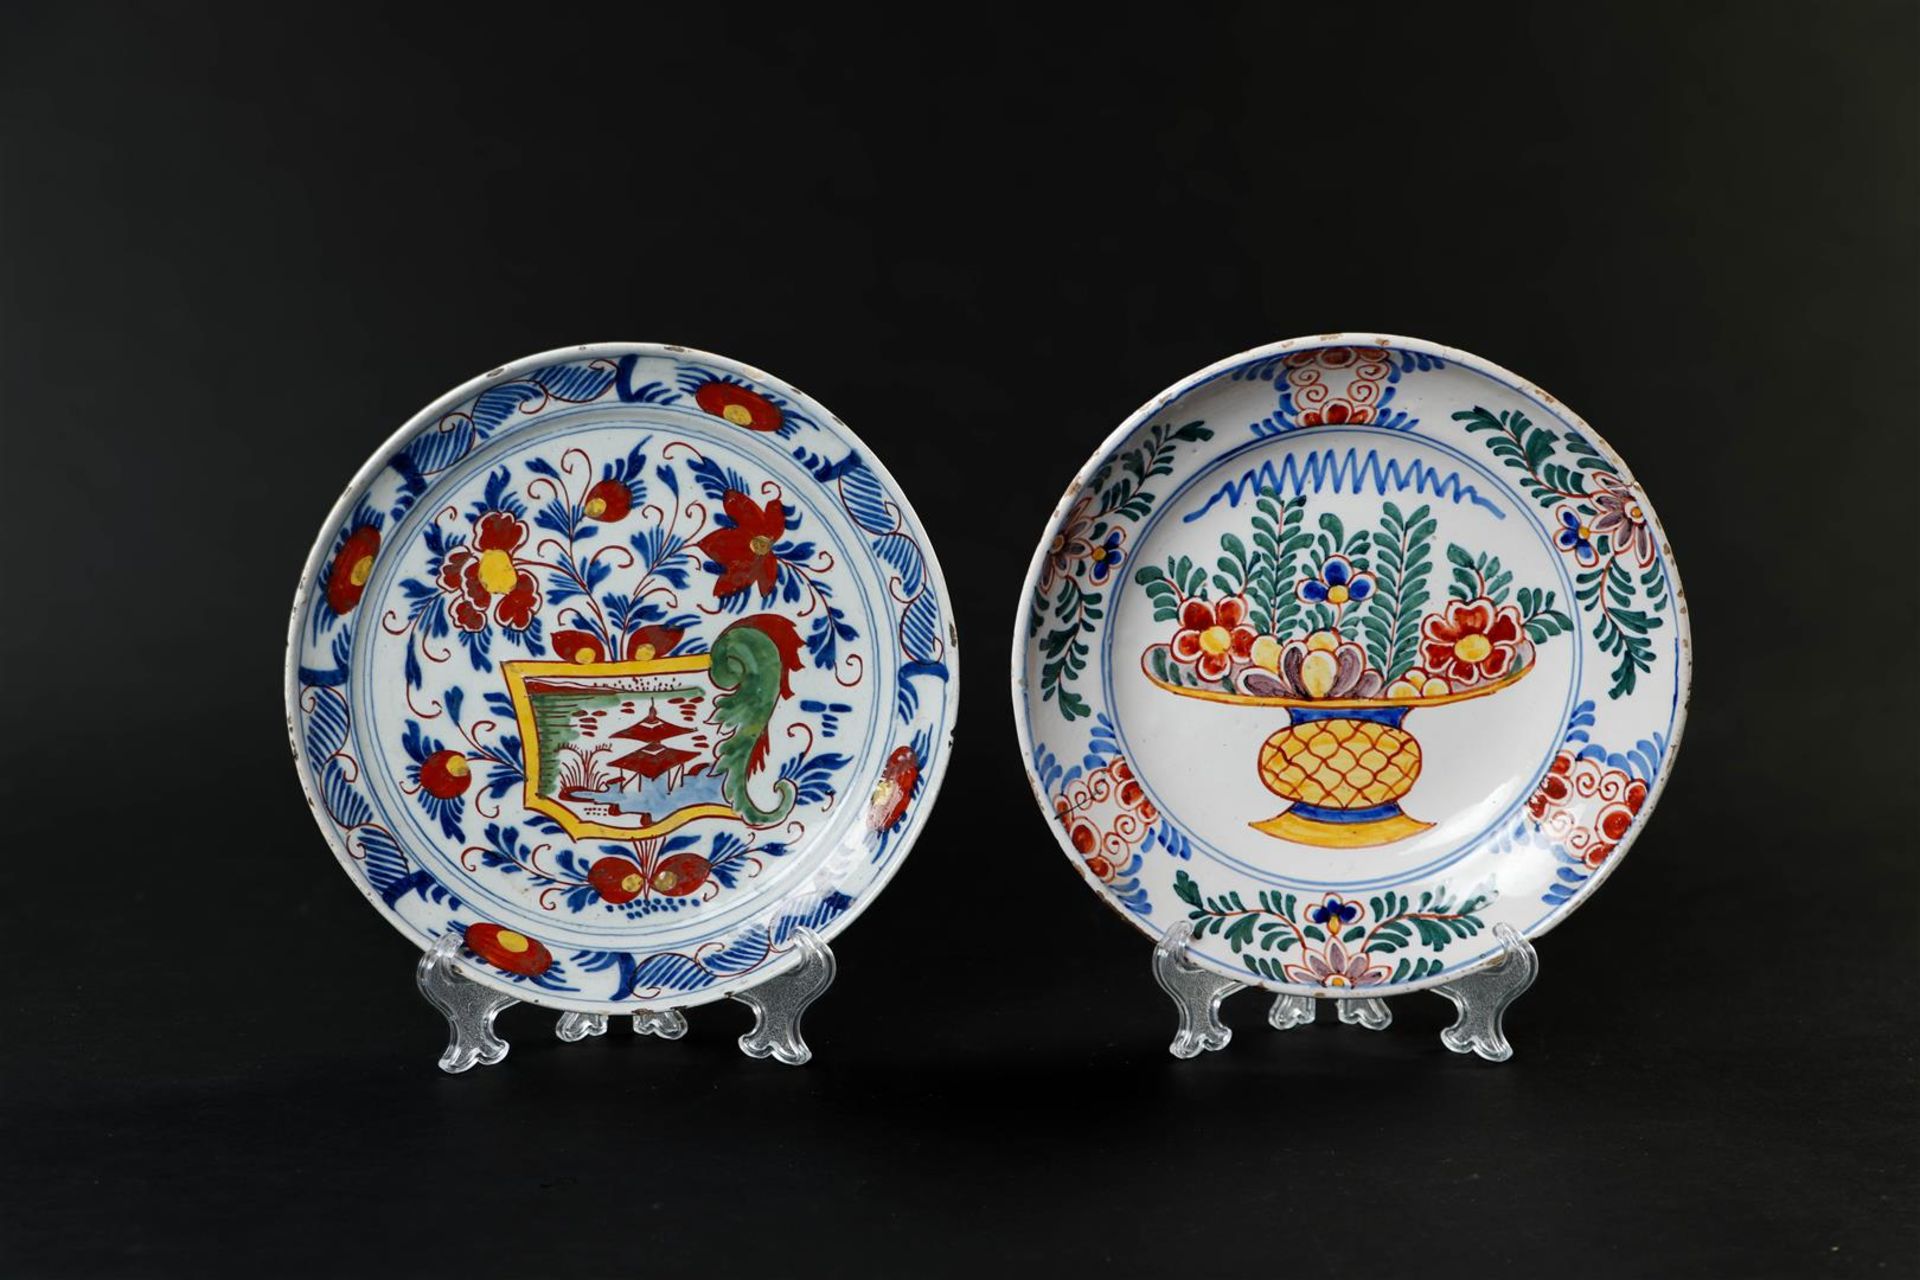 Two earthenware plates with floral decor, one marked "De porceleyne saucer". Delft, 18th century.
Di